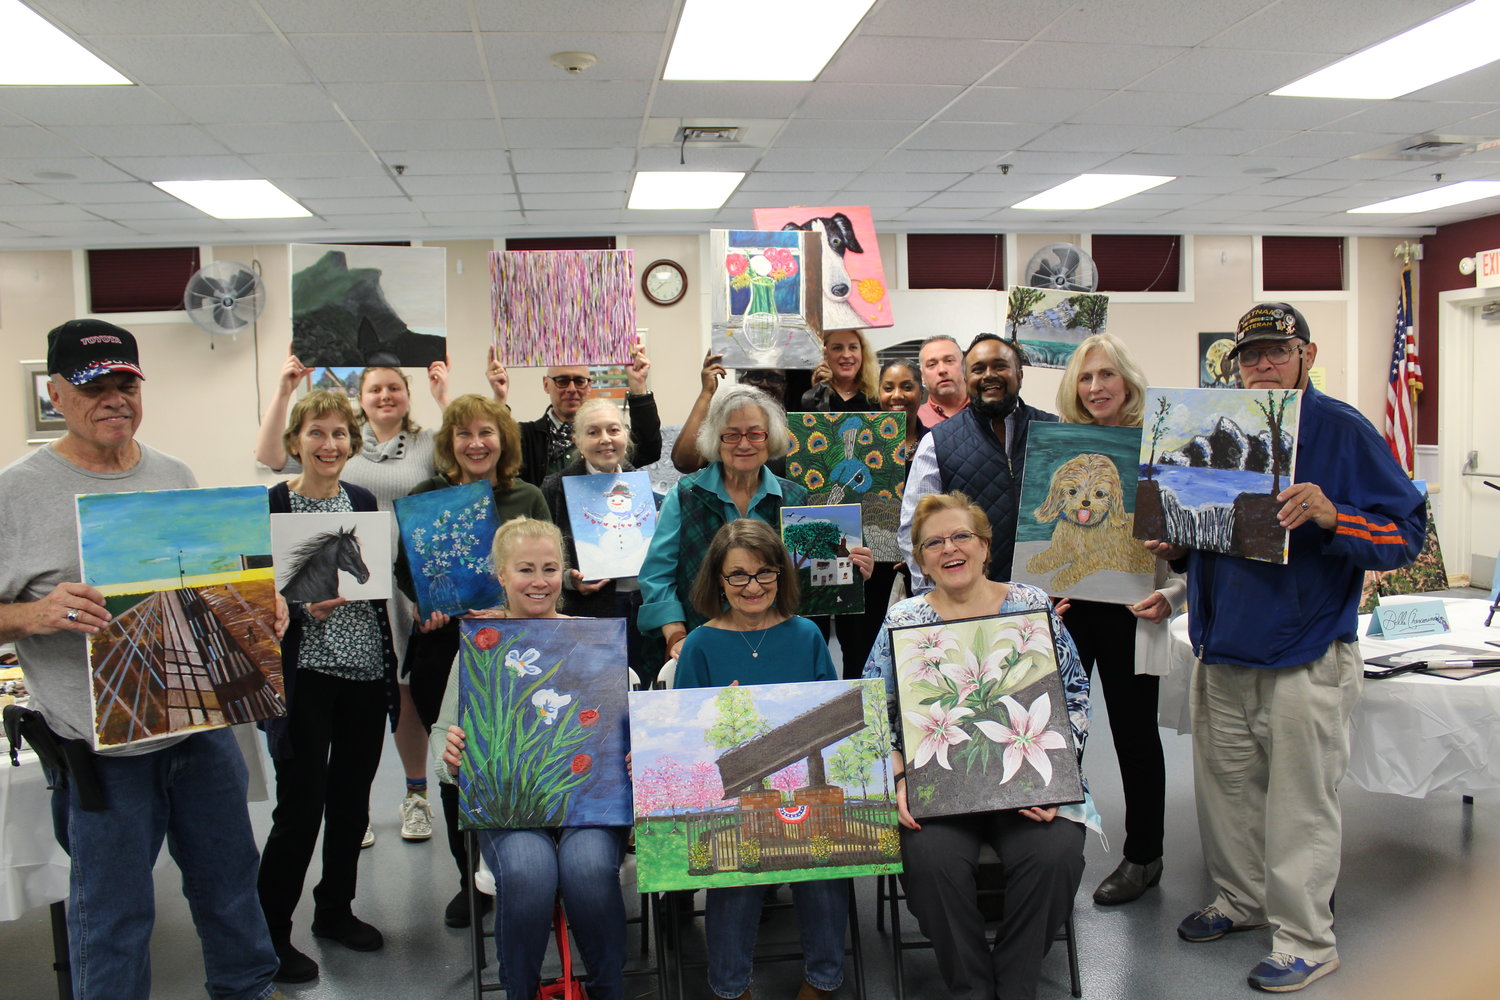 Matt Khan with his students at the Community Center showing off their completed works at the end of the 2021 acrylic art class.